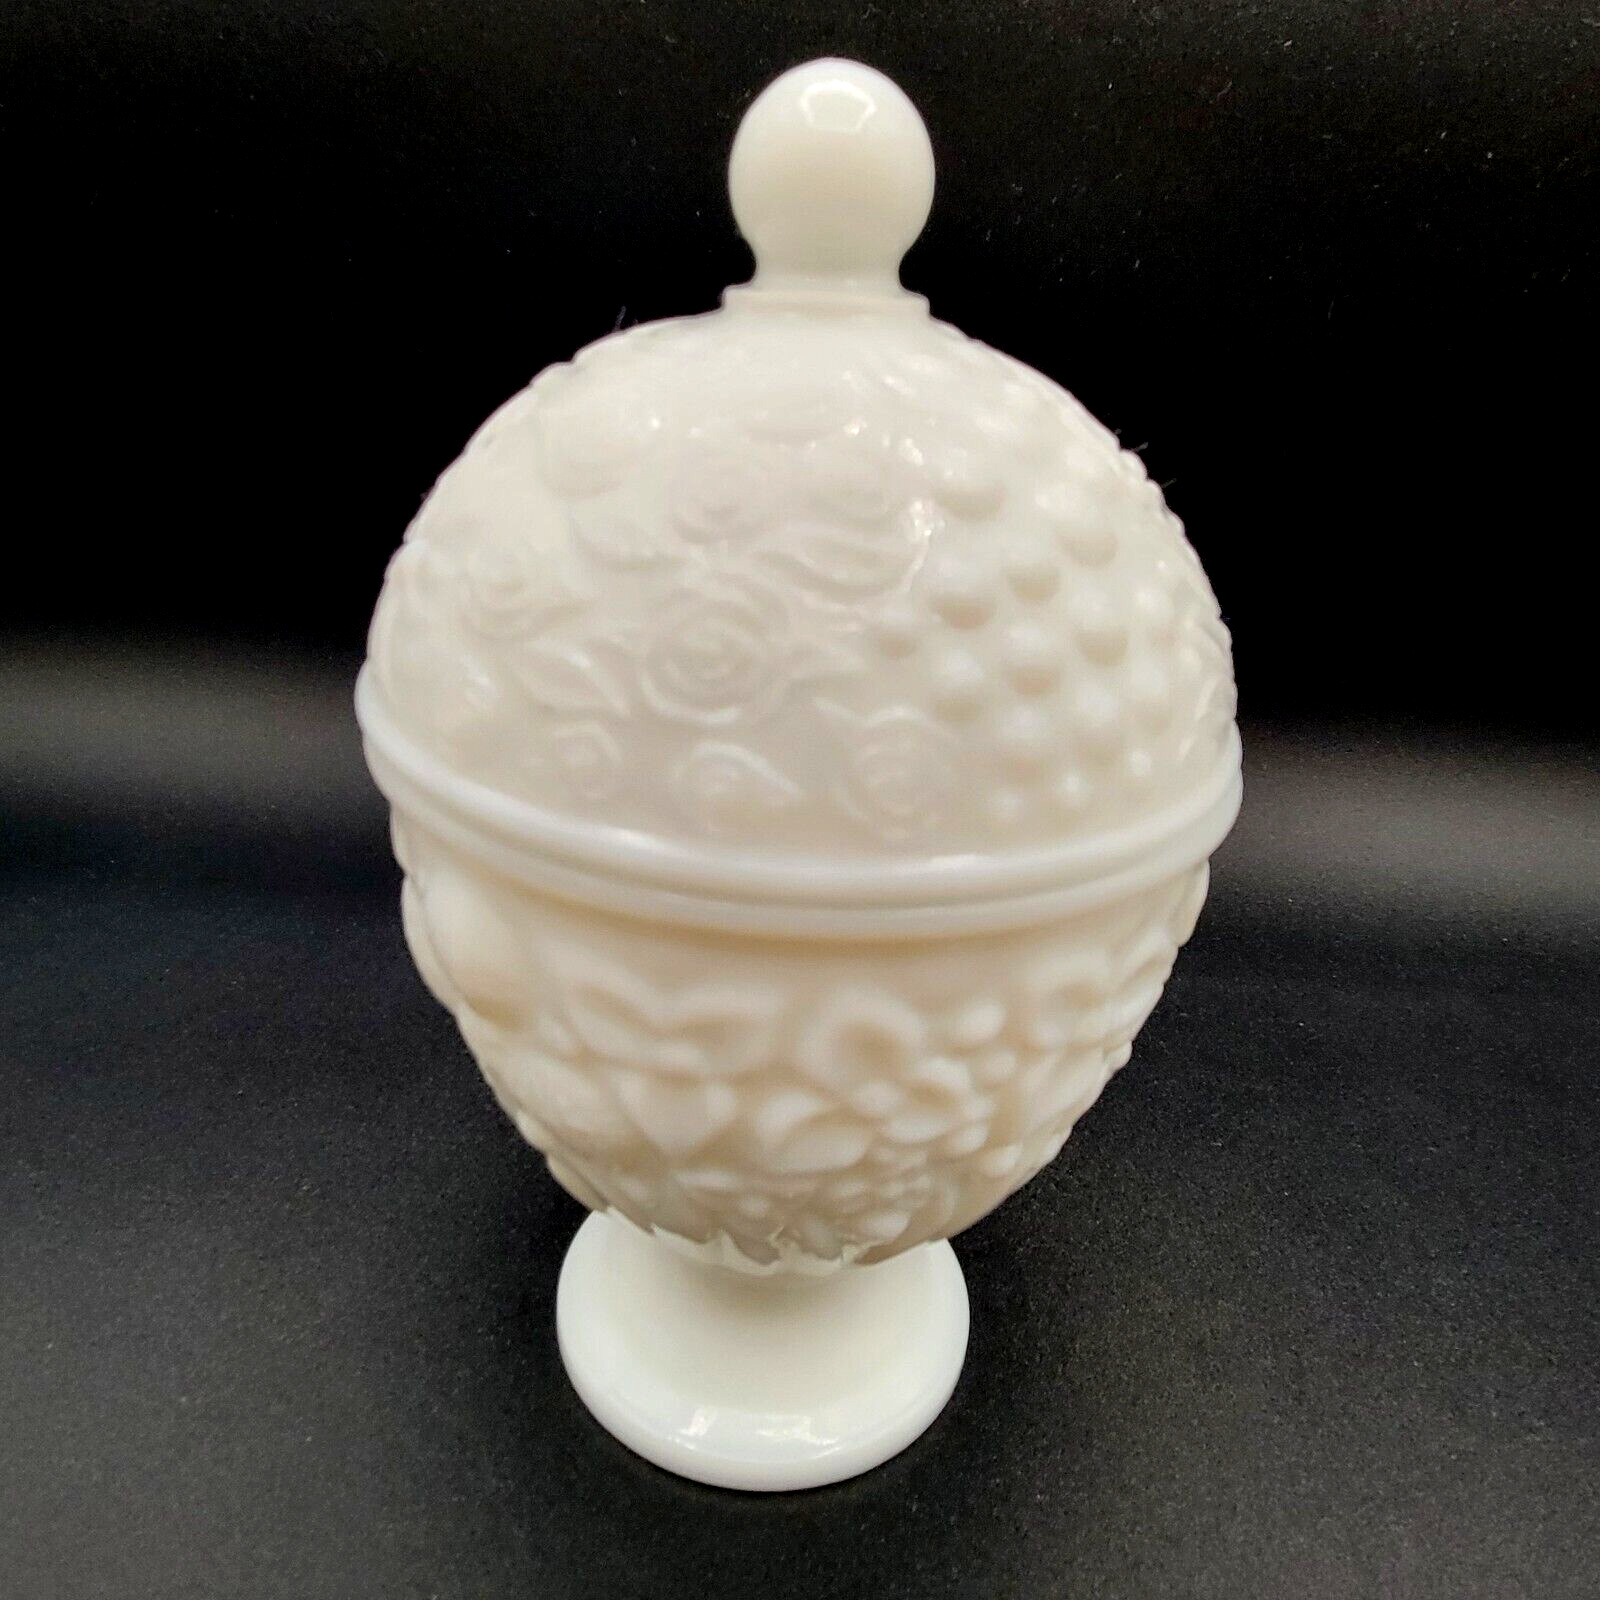 RARE Vintage Avon White Milk Glass Lidded Candy Dish Embossed Flowers and Grapes